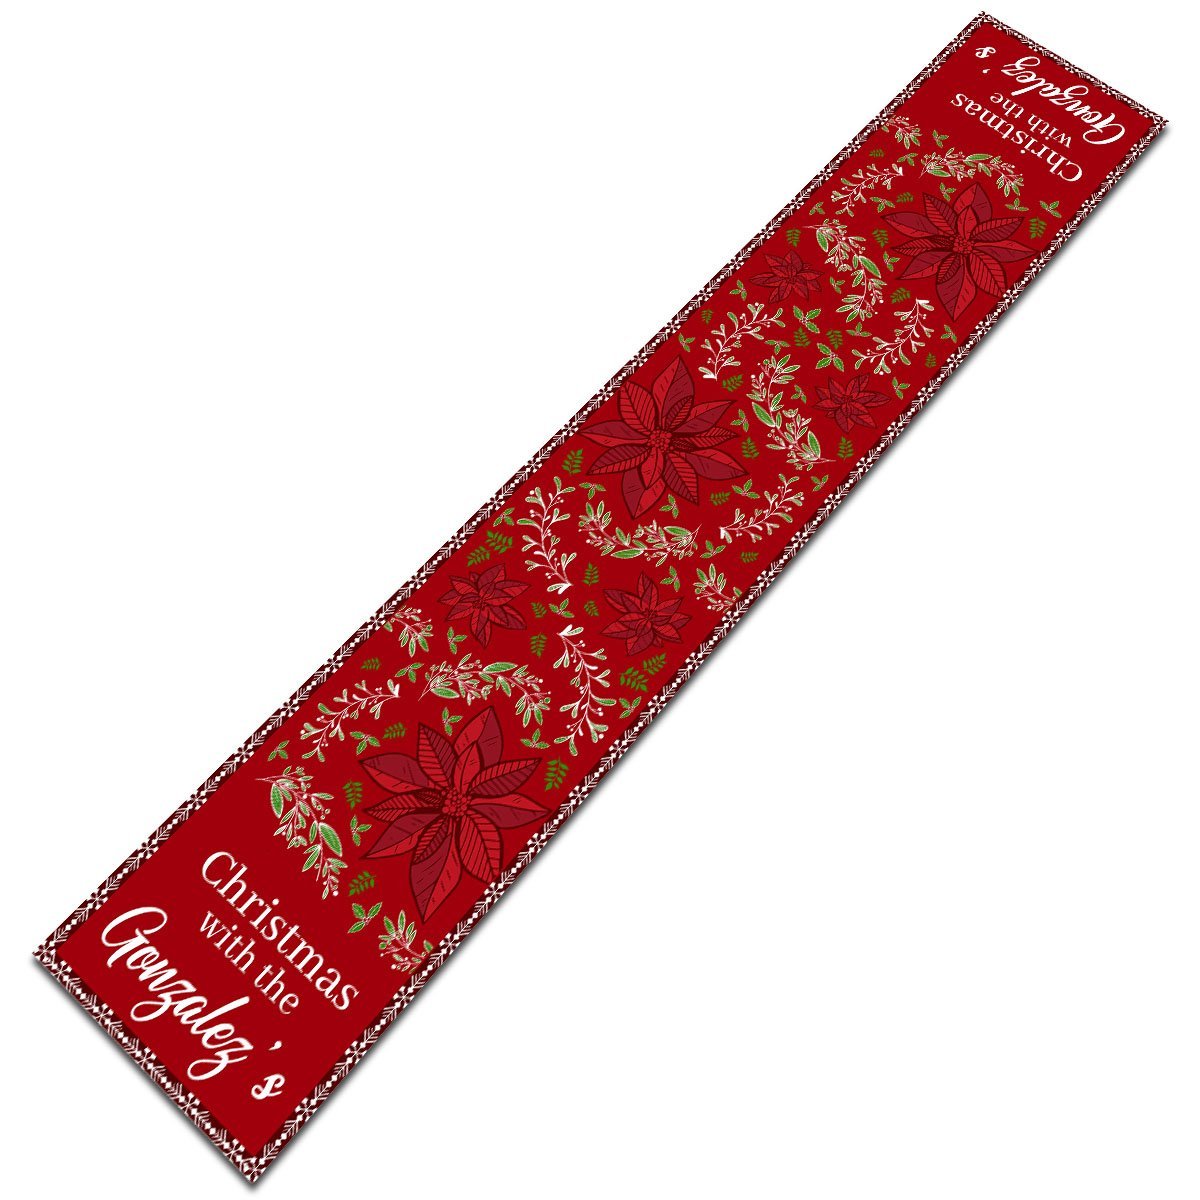 Personalized Table Runner, Christmas Family